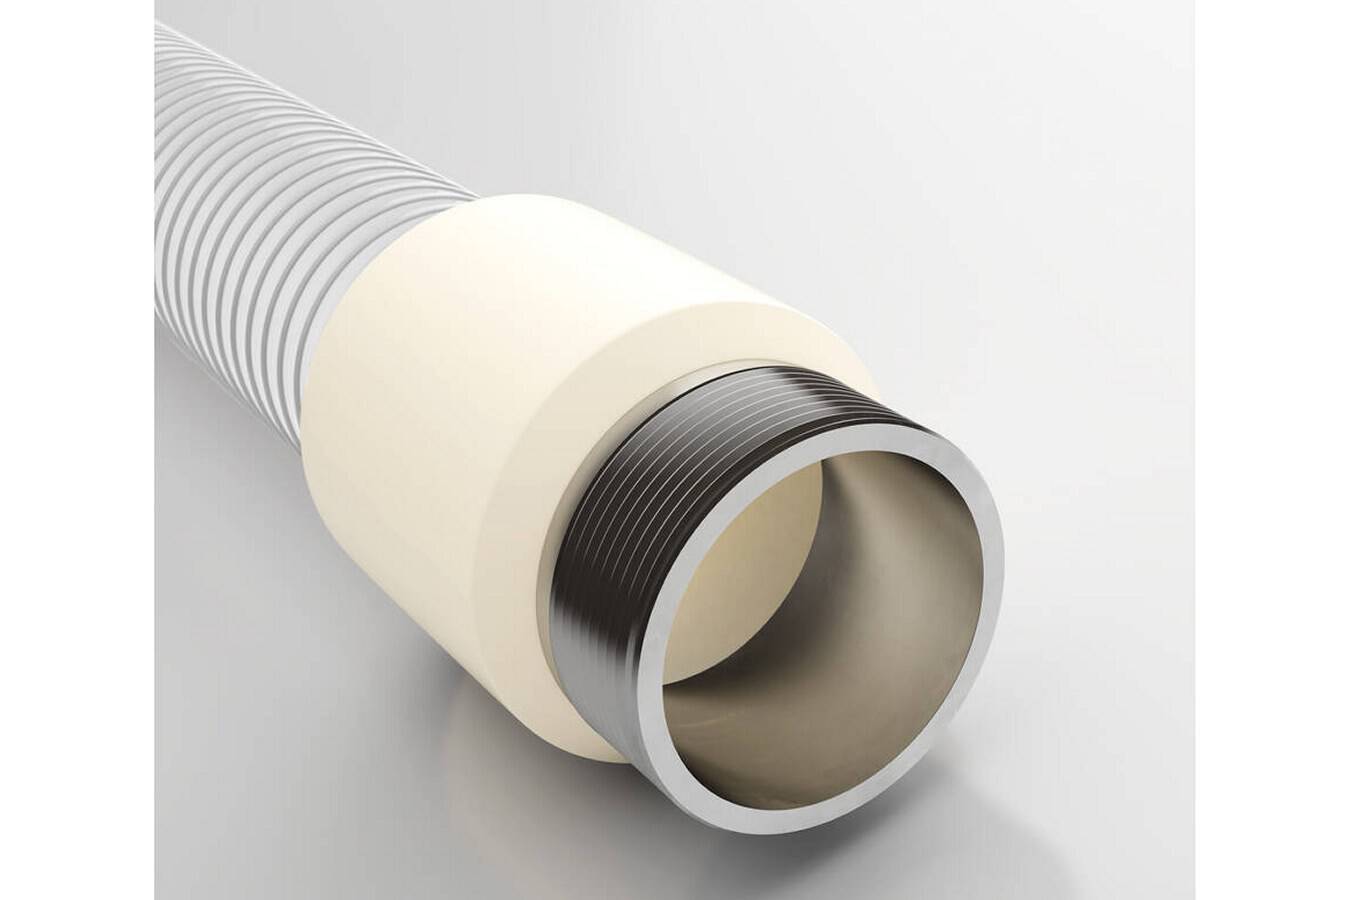 Food compliant high-tech hoses from the hose industry expert A group-wide and international campaign has recently been launched focusing on the importance of food-compliant high-tech hoses in the food industry.